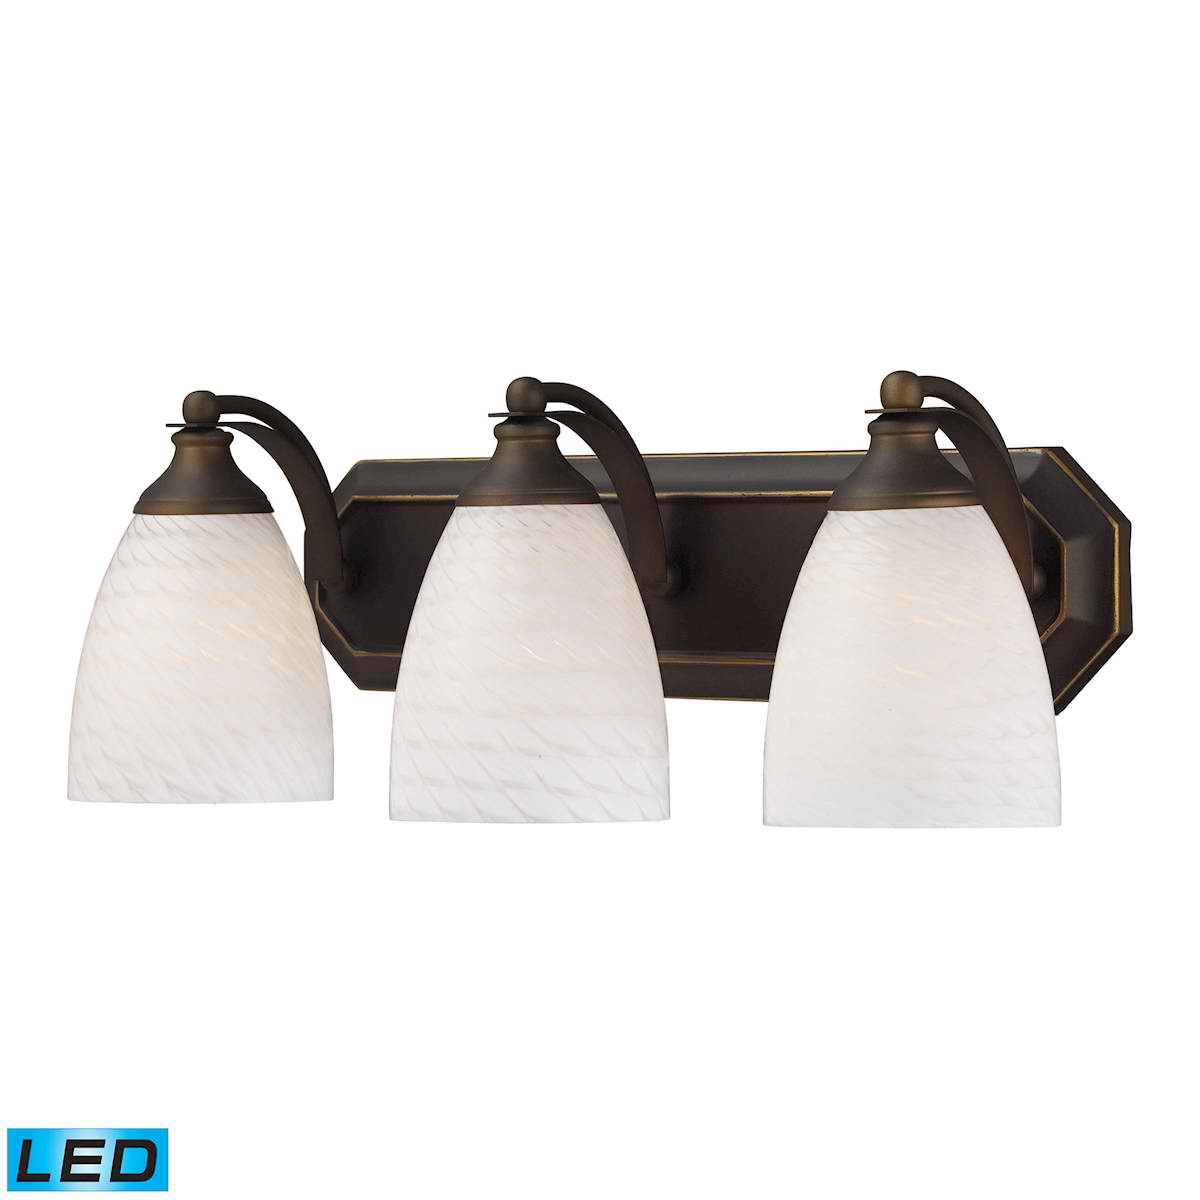 3 Light Vanity in Aged Bronze and White Swirl Glass - LED, 800 Lumens (2400 Lumens Total) with Full Scale